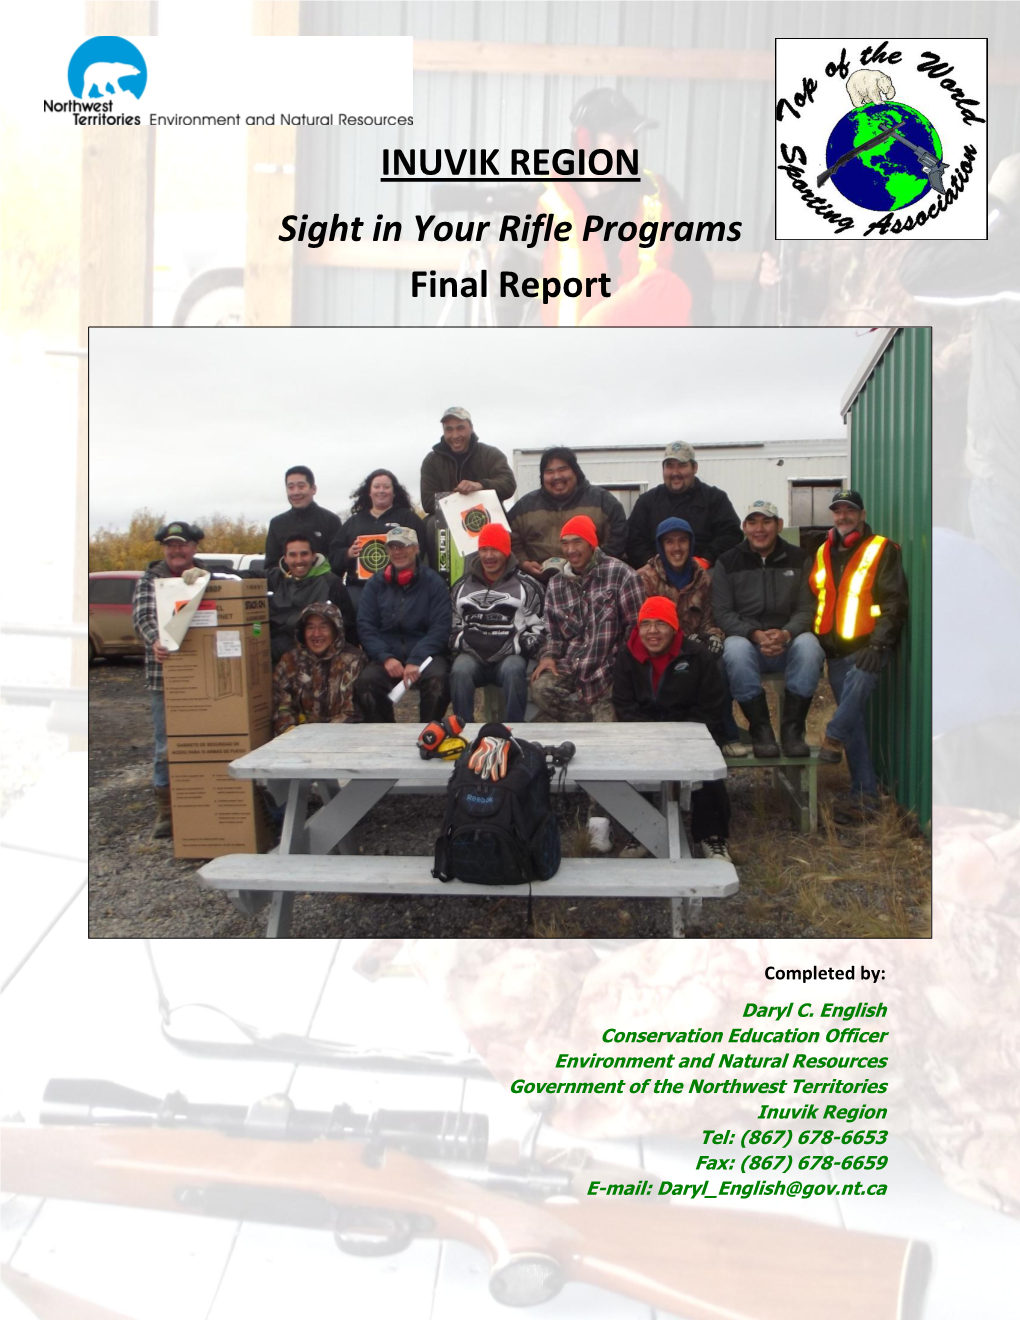 INUVIK REGION Sight in Your Rifle Programs Final Report